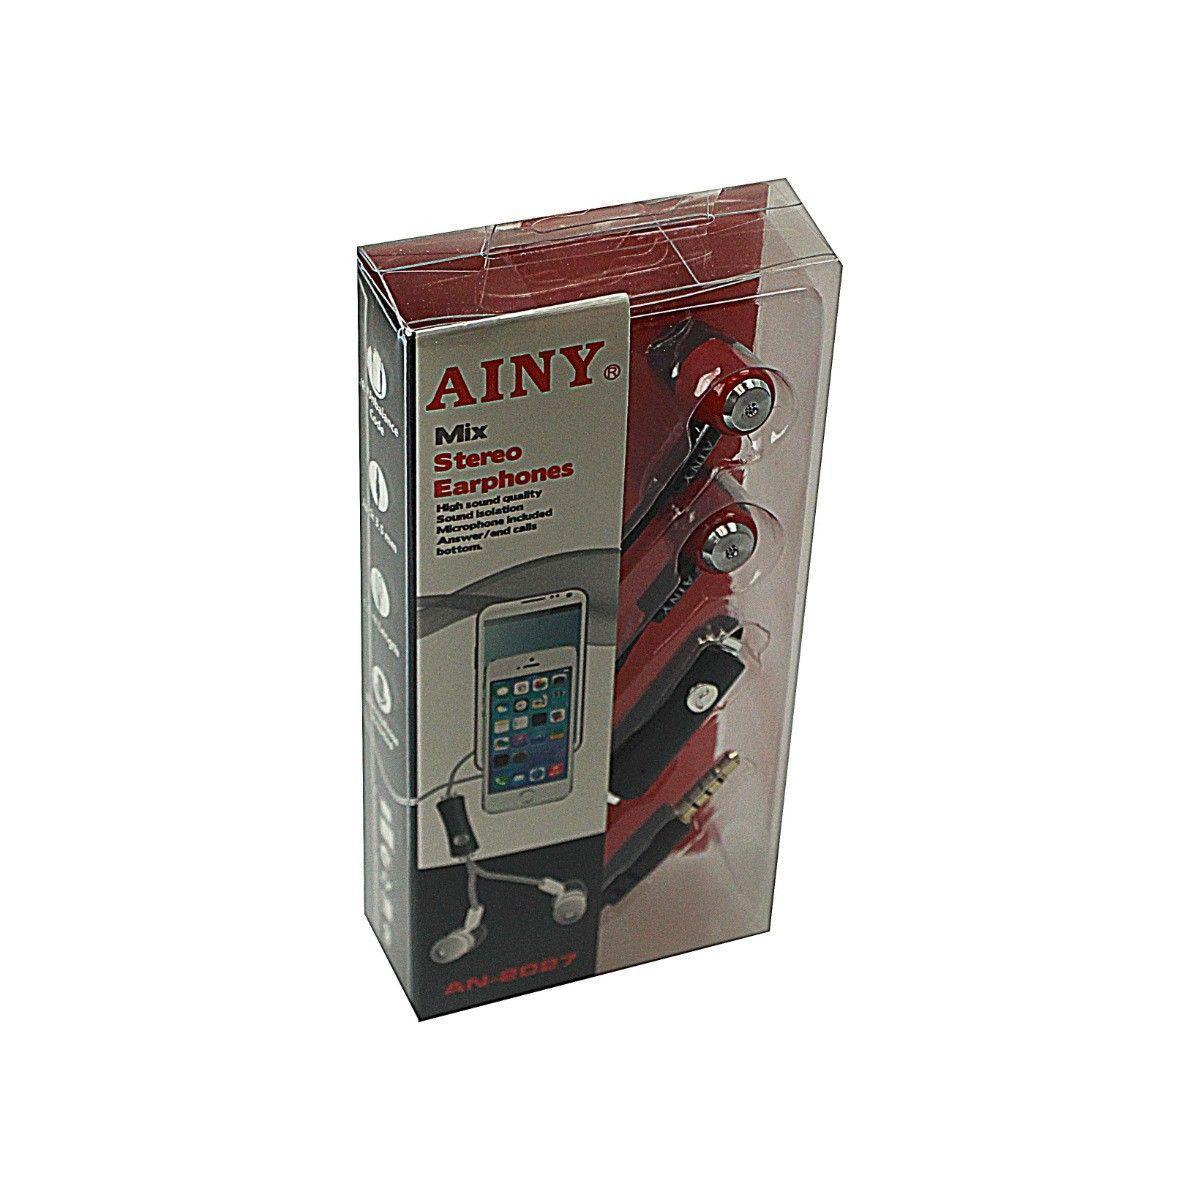 AINY Mix Stereo Earphones In Assorted Colours 3949 (Large Letter Rate)